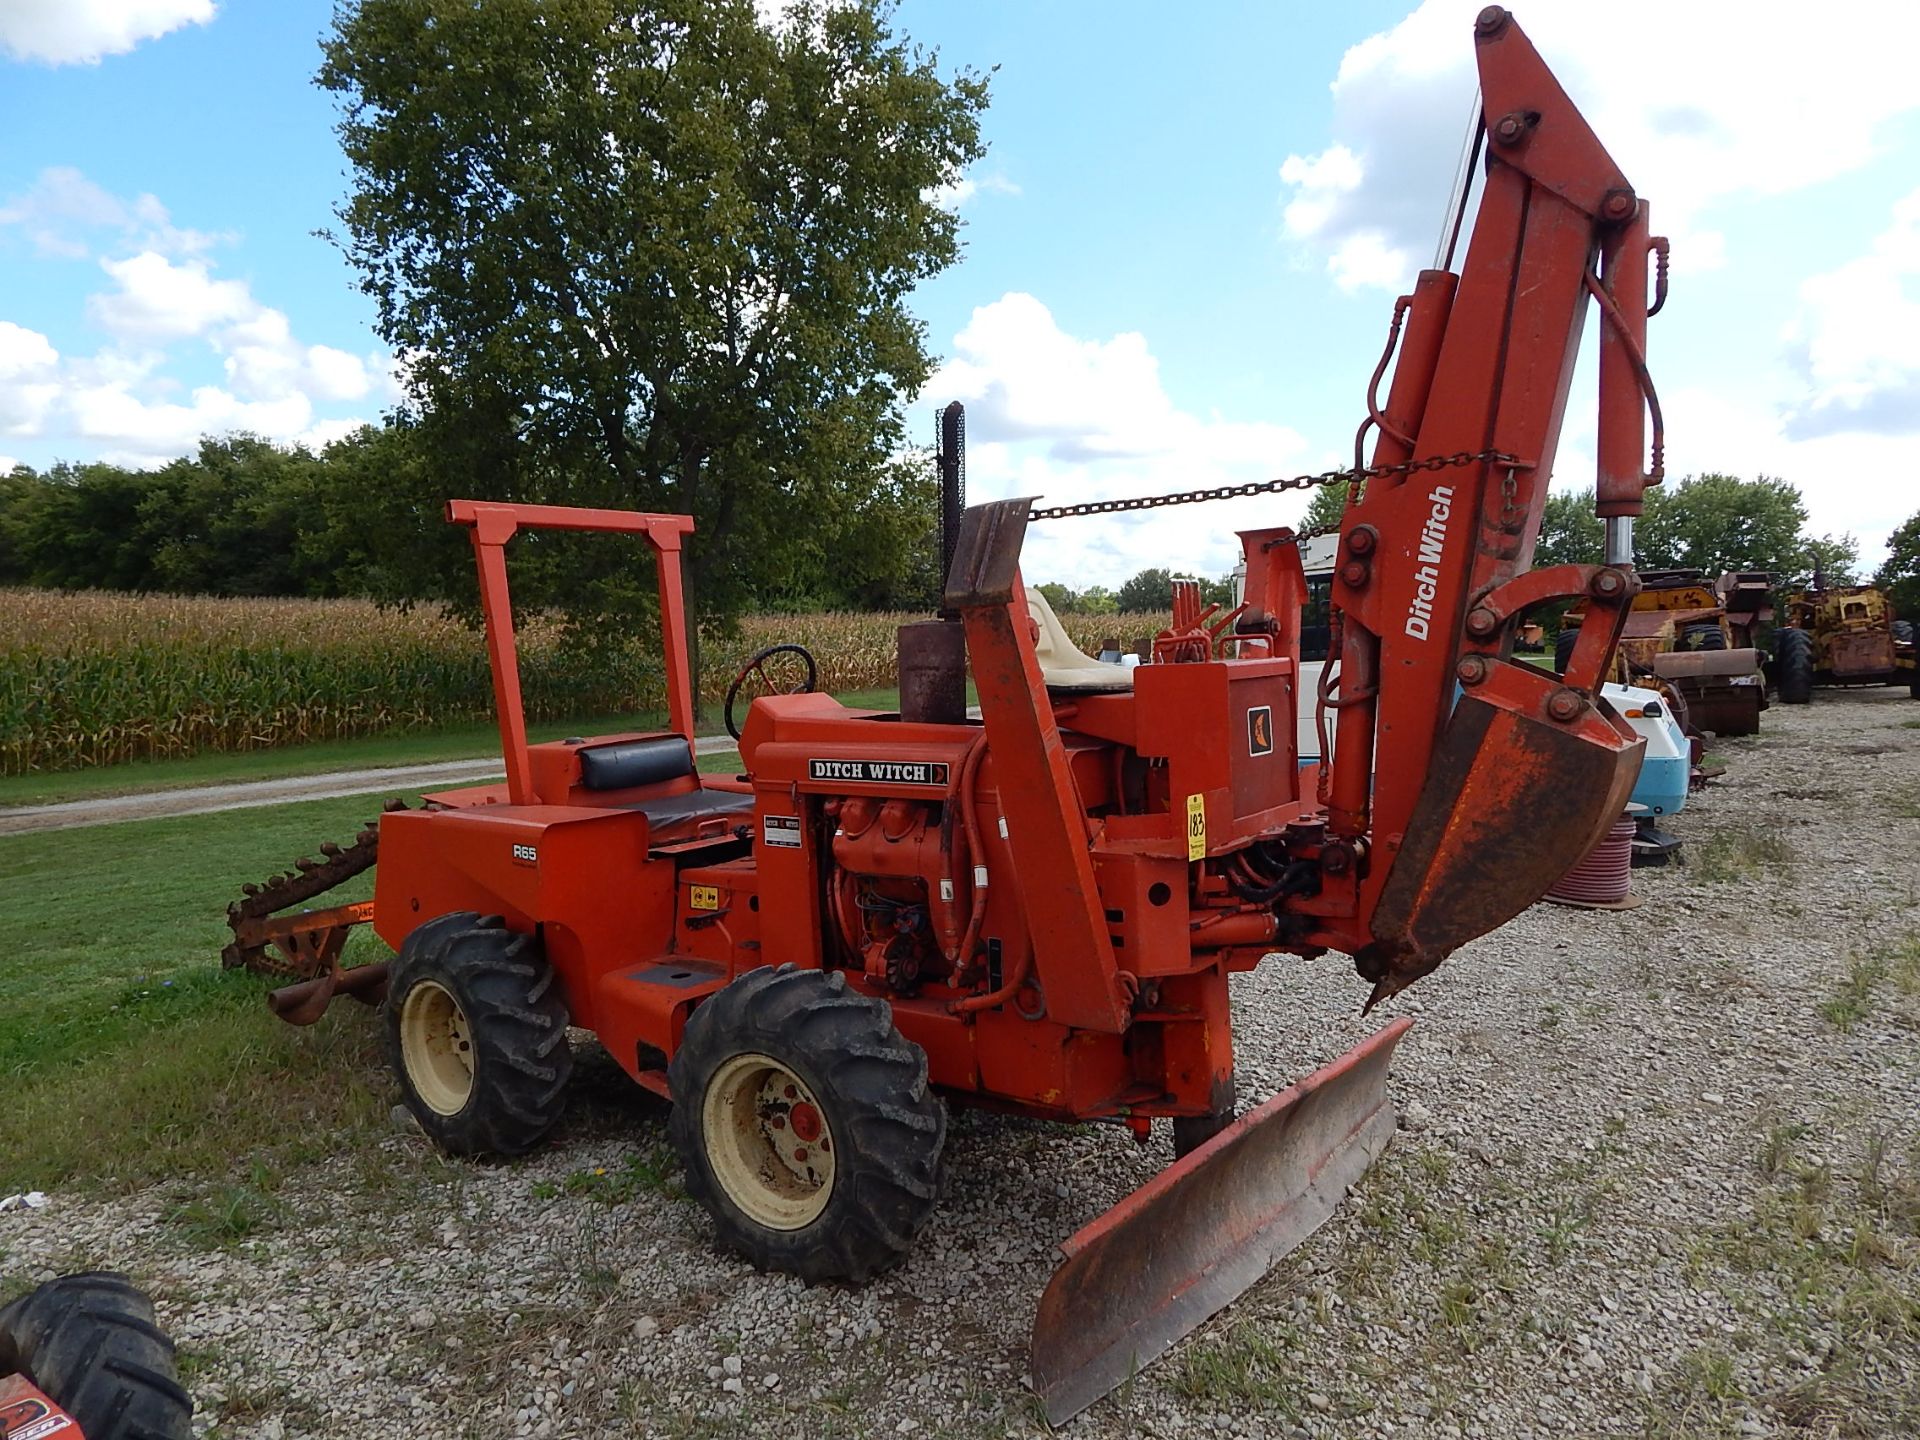 Ditch Witch R65 4 x 4 Trencher w/ 7 ft Depth, 308 Hours, Backhoe Attachment w/ 18 in Bucket, 6 ft